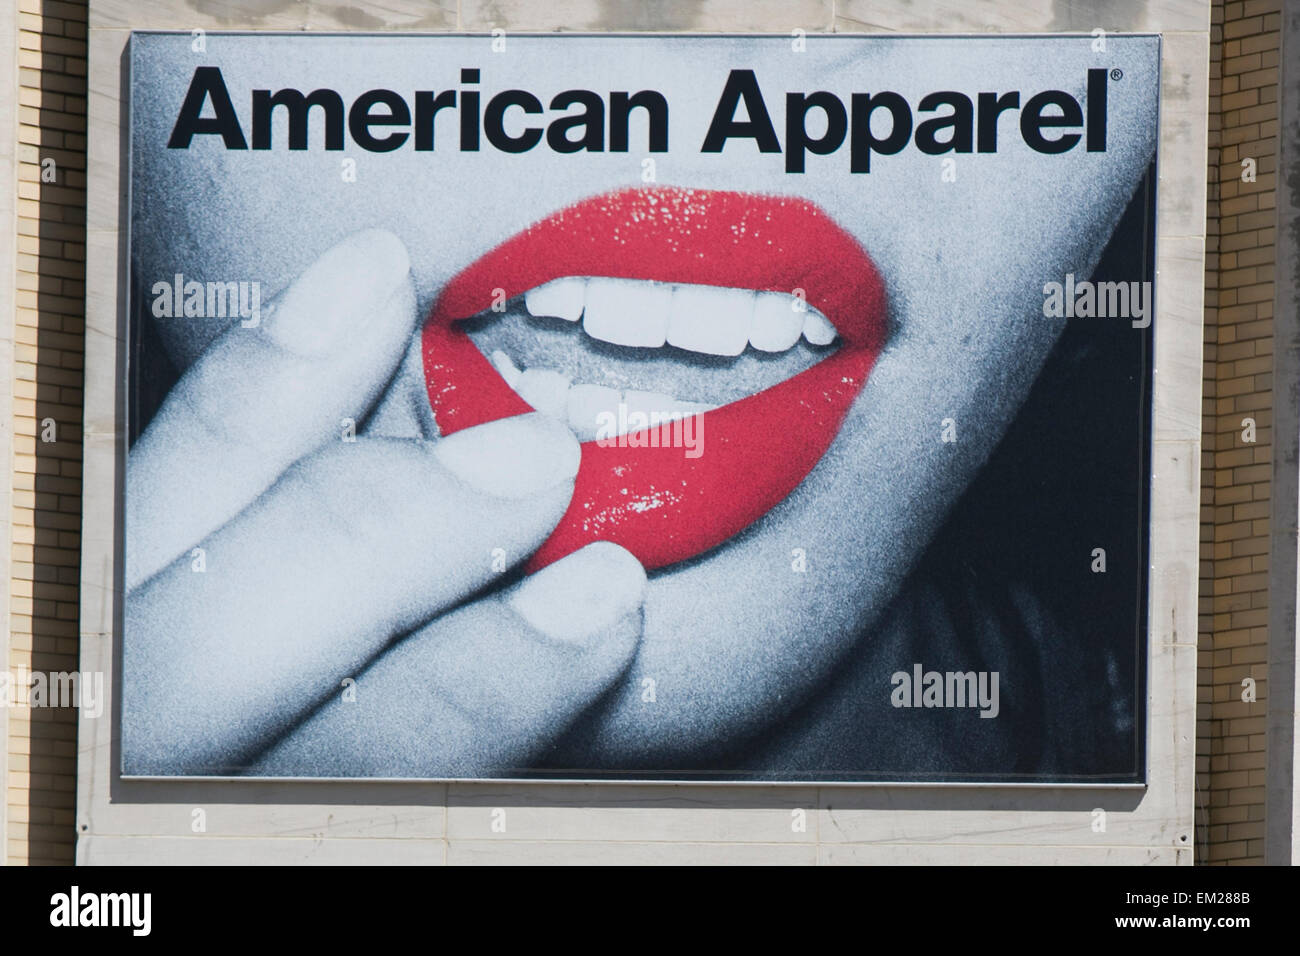 An exterior view of an American Apparel clothing retail store in Silver Spring, Maryland. Stock Photo